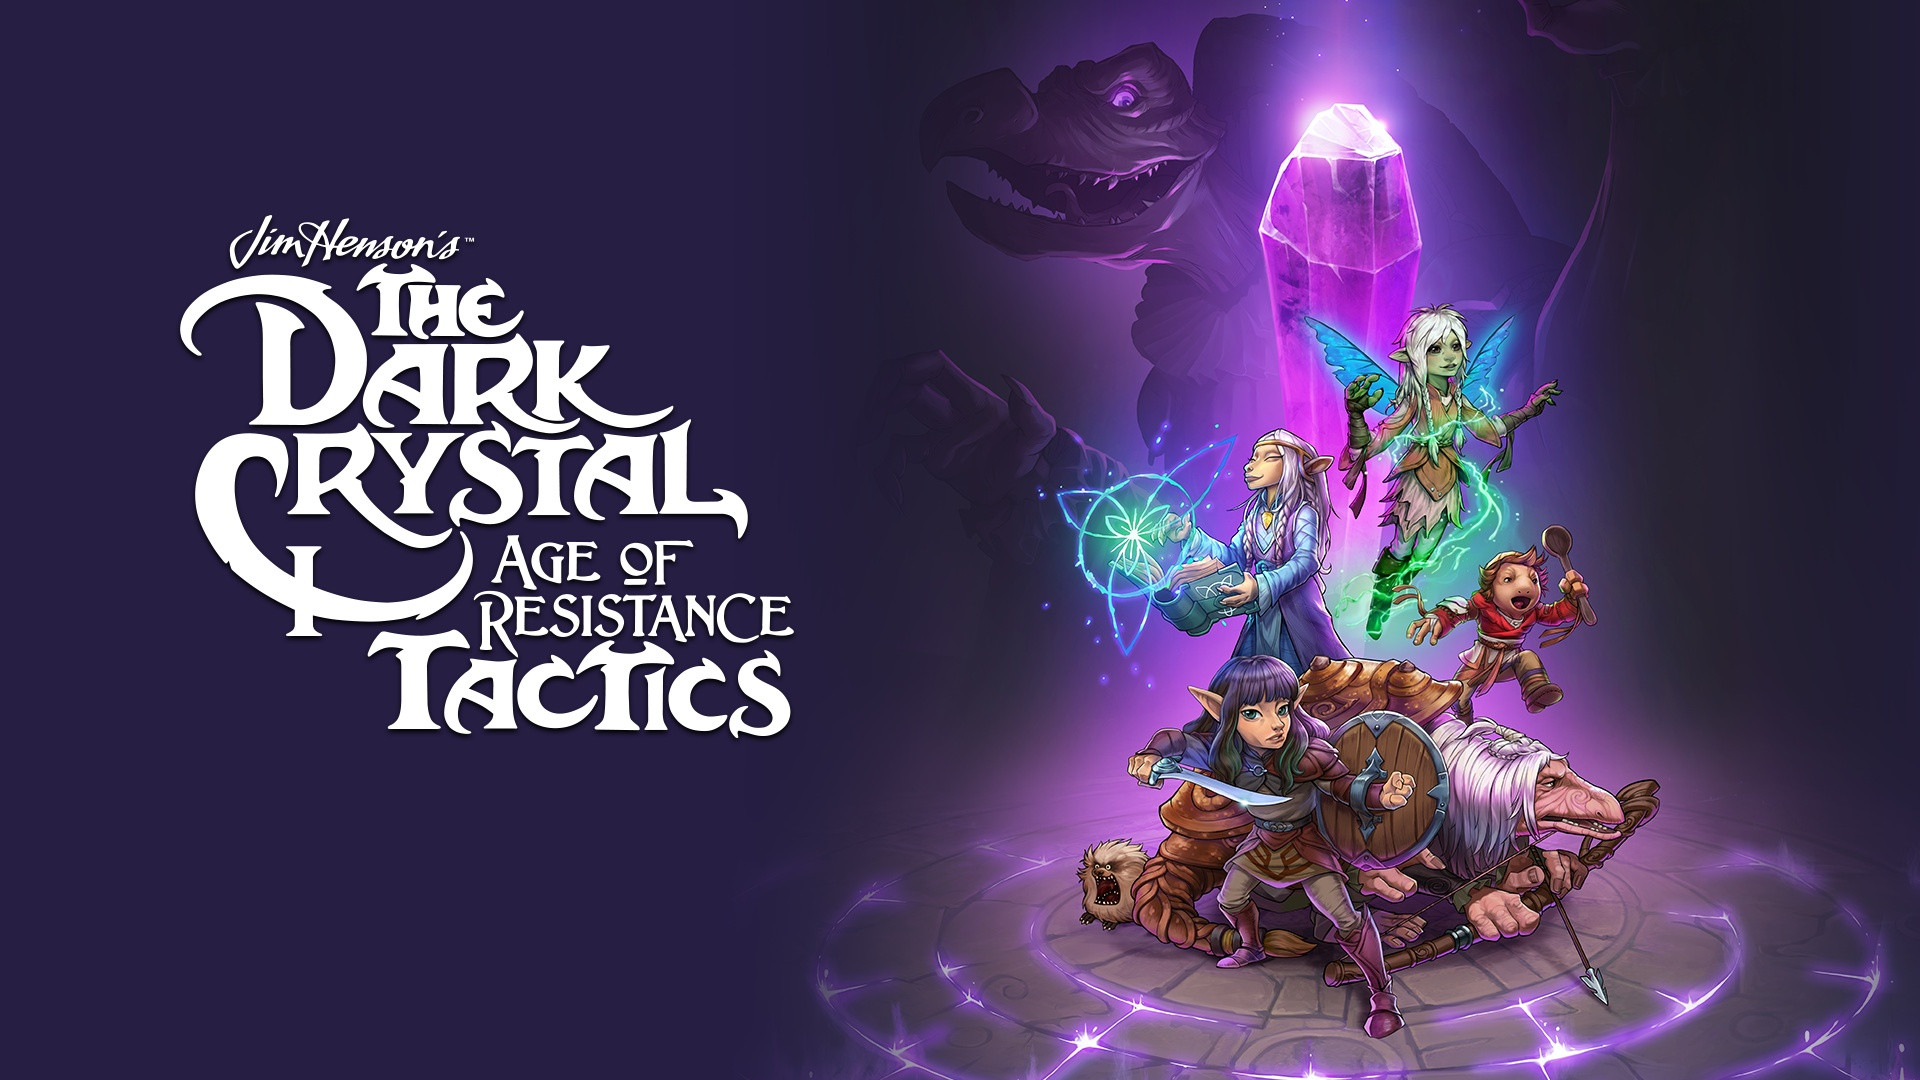 Exploring the World of Thra in The Dark Crystal: Age of Resistance Tactics